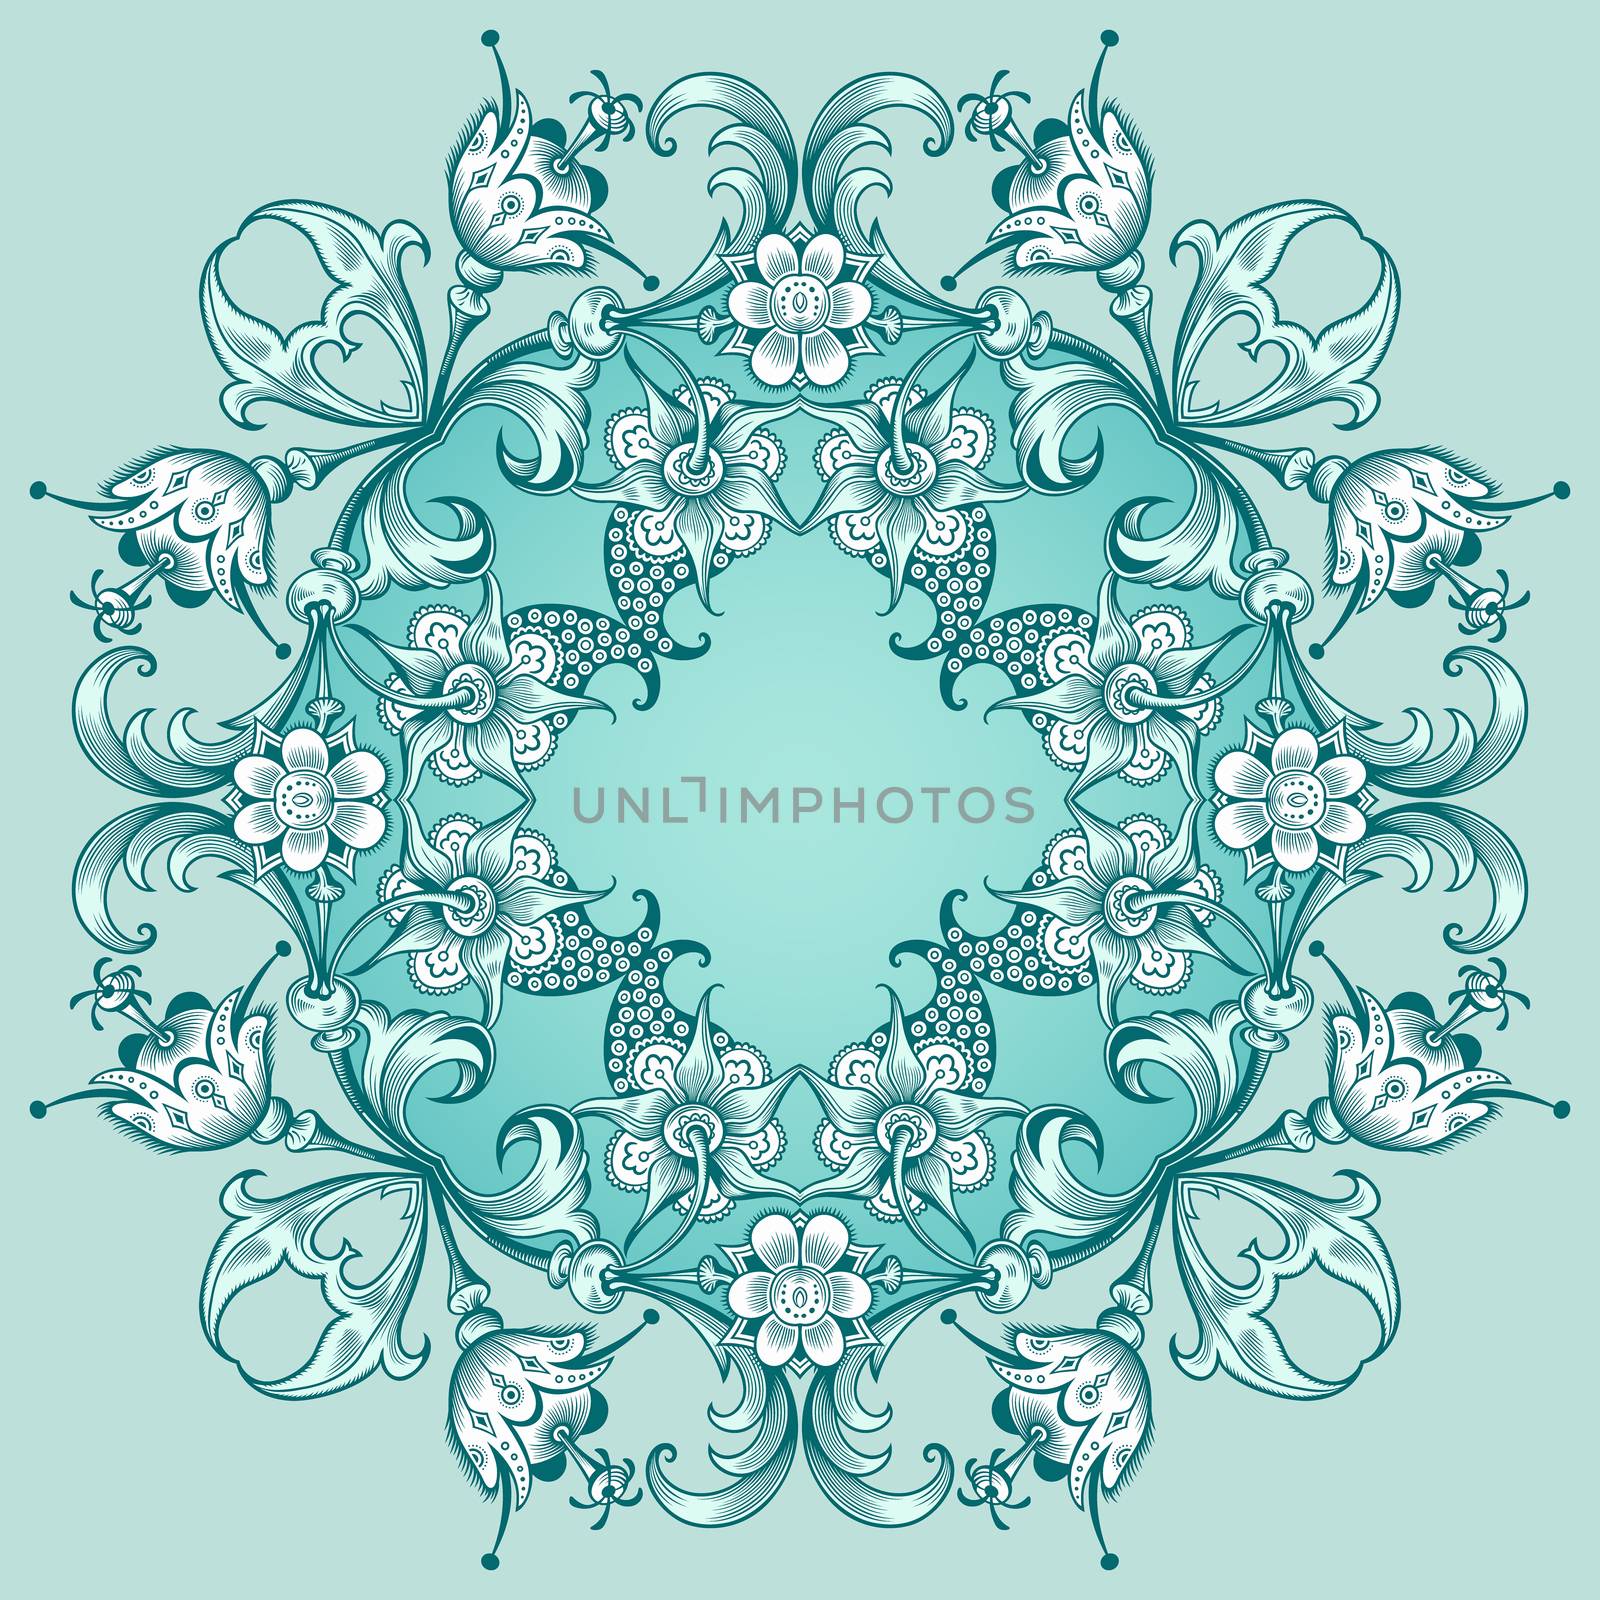 Vector abstract decorative floral ethnic ornamental illustration.